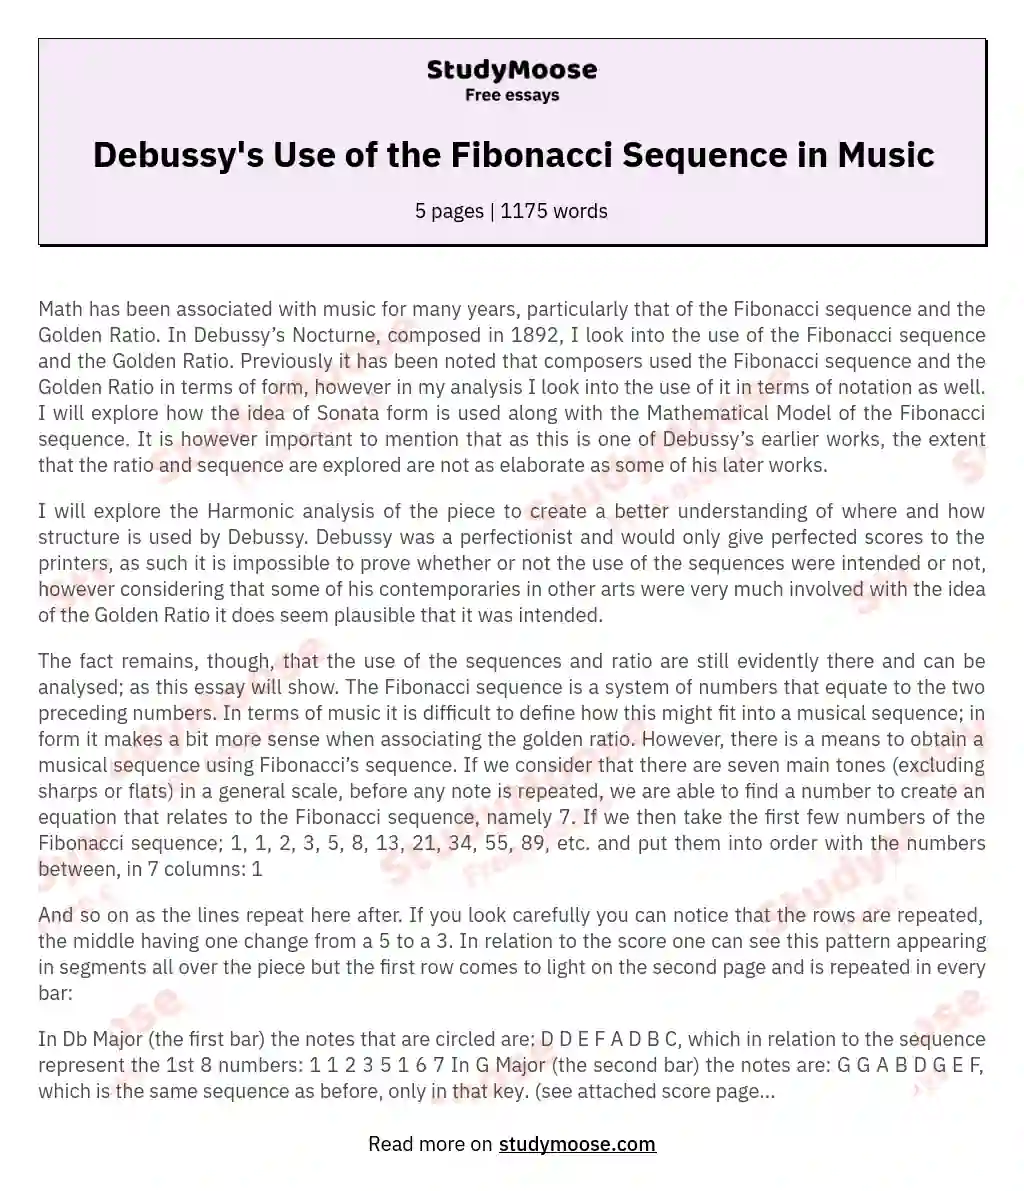 Debussy's Use of the Fibonacci Sequence in Music